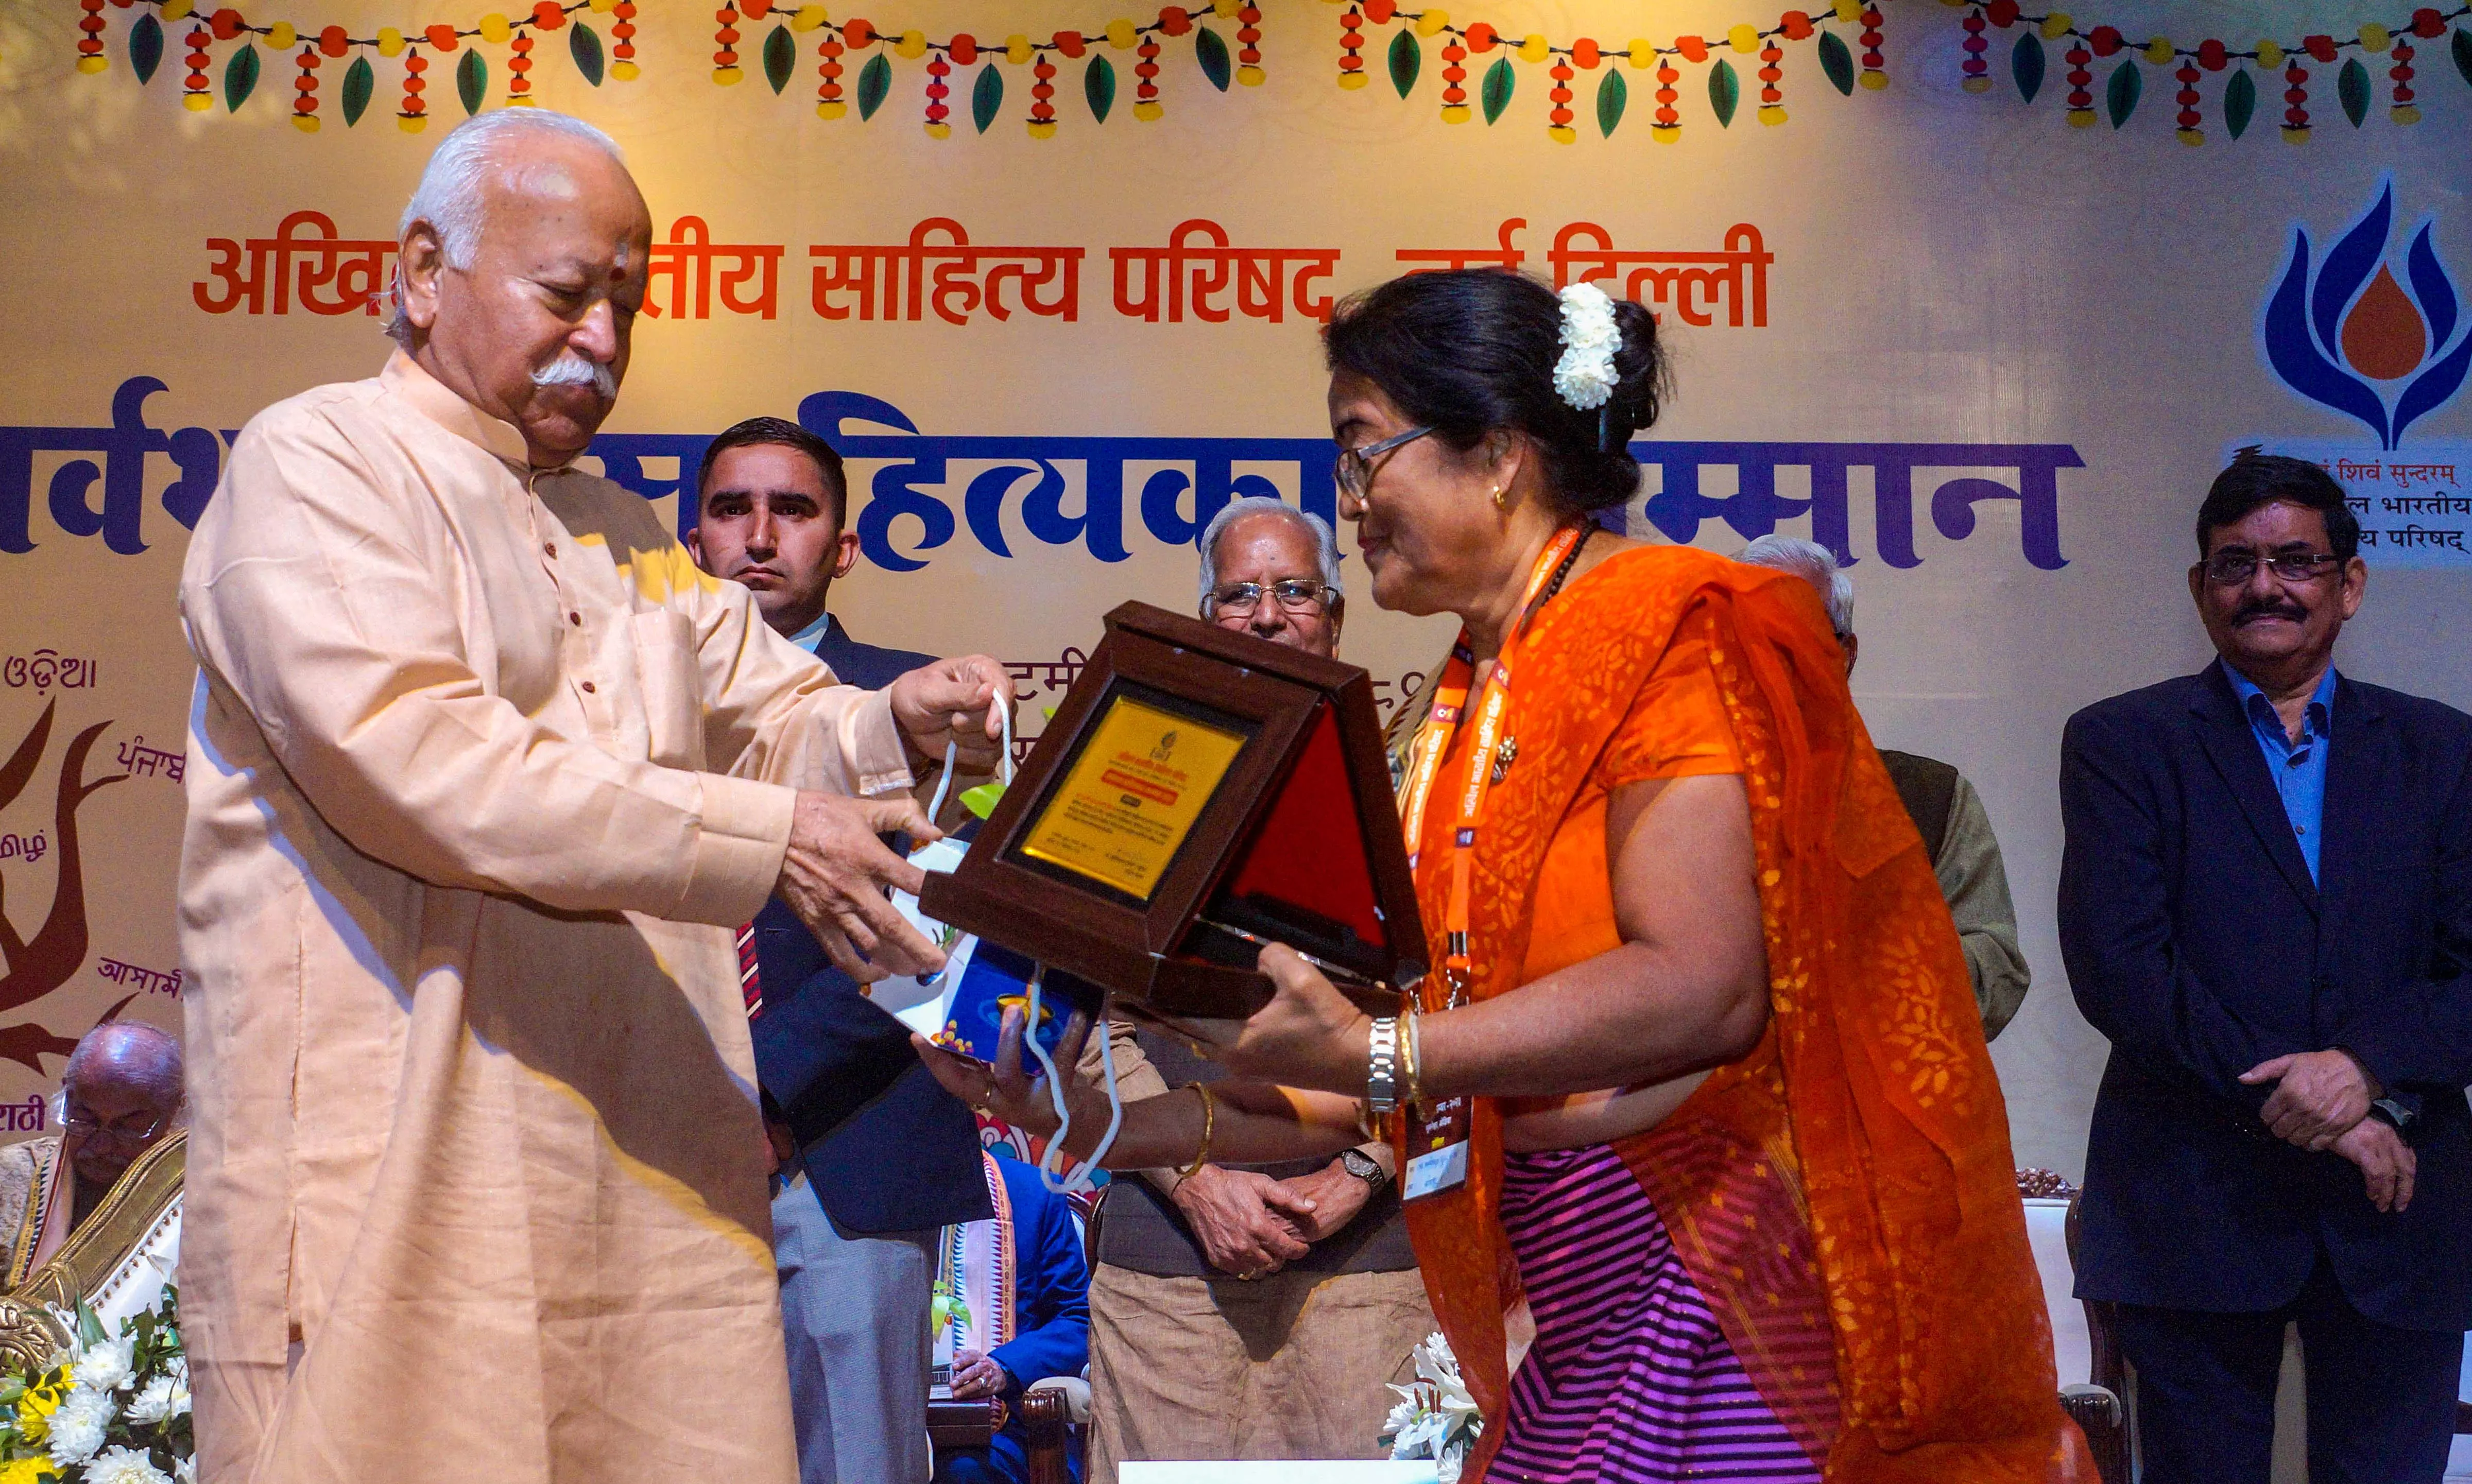 Bhagwat advocates for mother tongues over encouragement of foreign languages